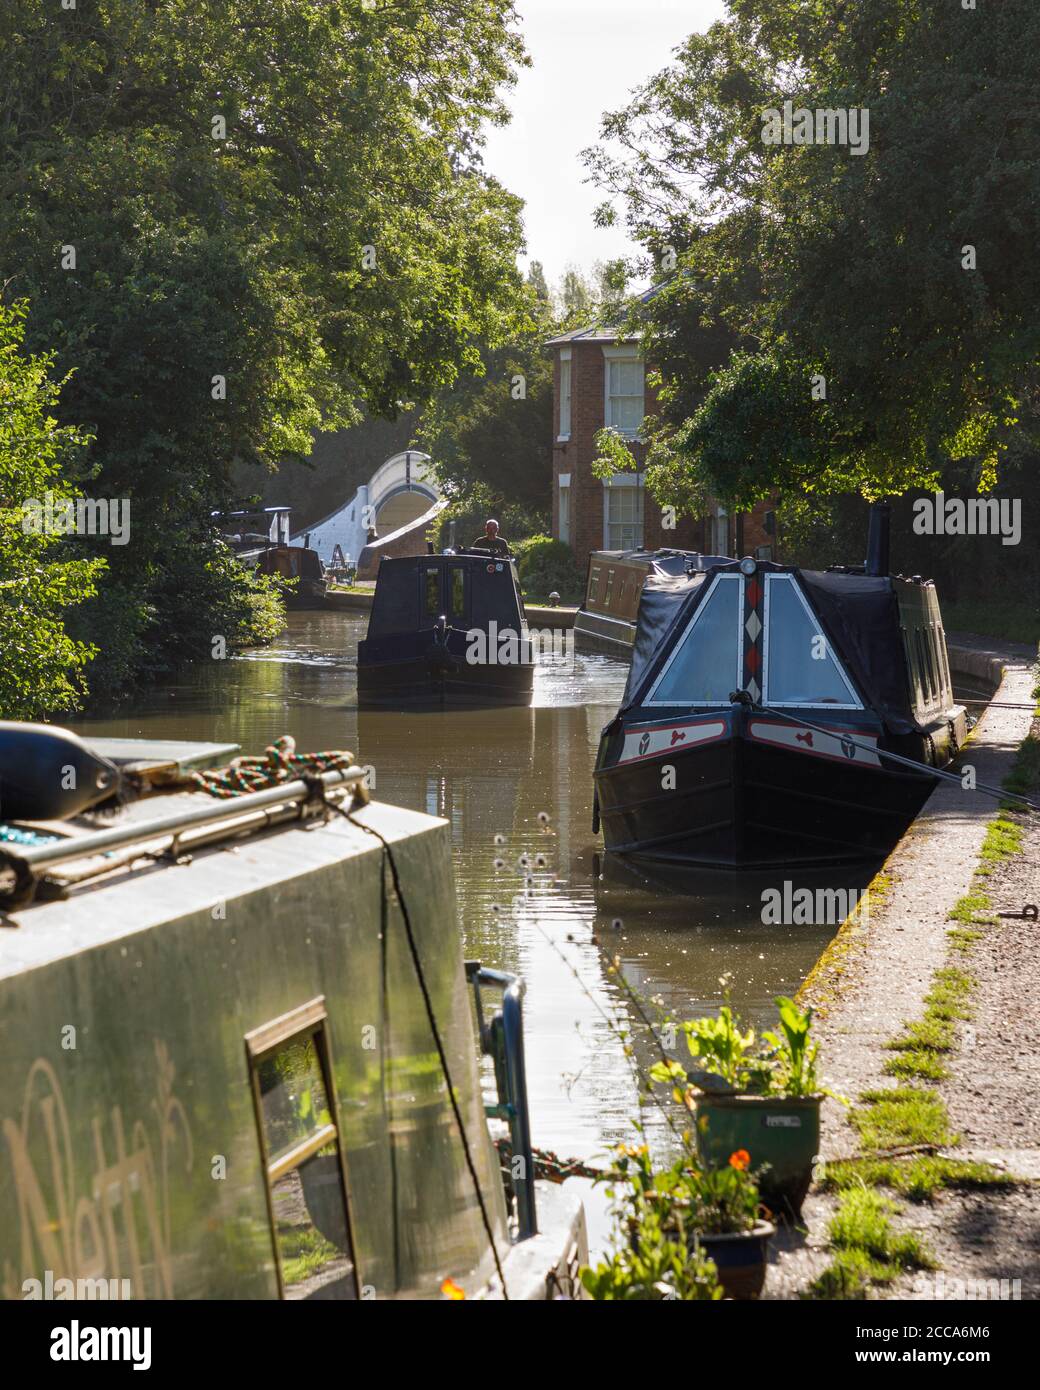 Braunston, Northamptonshire, UK - 20/08/20: Narrowboats moored on the Grand Union canal at Braunston, one of the busiest places on the UK waterways. Stock Photo